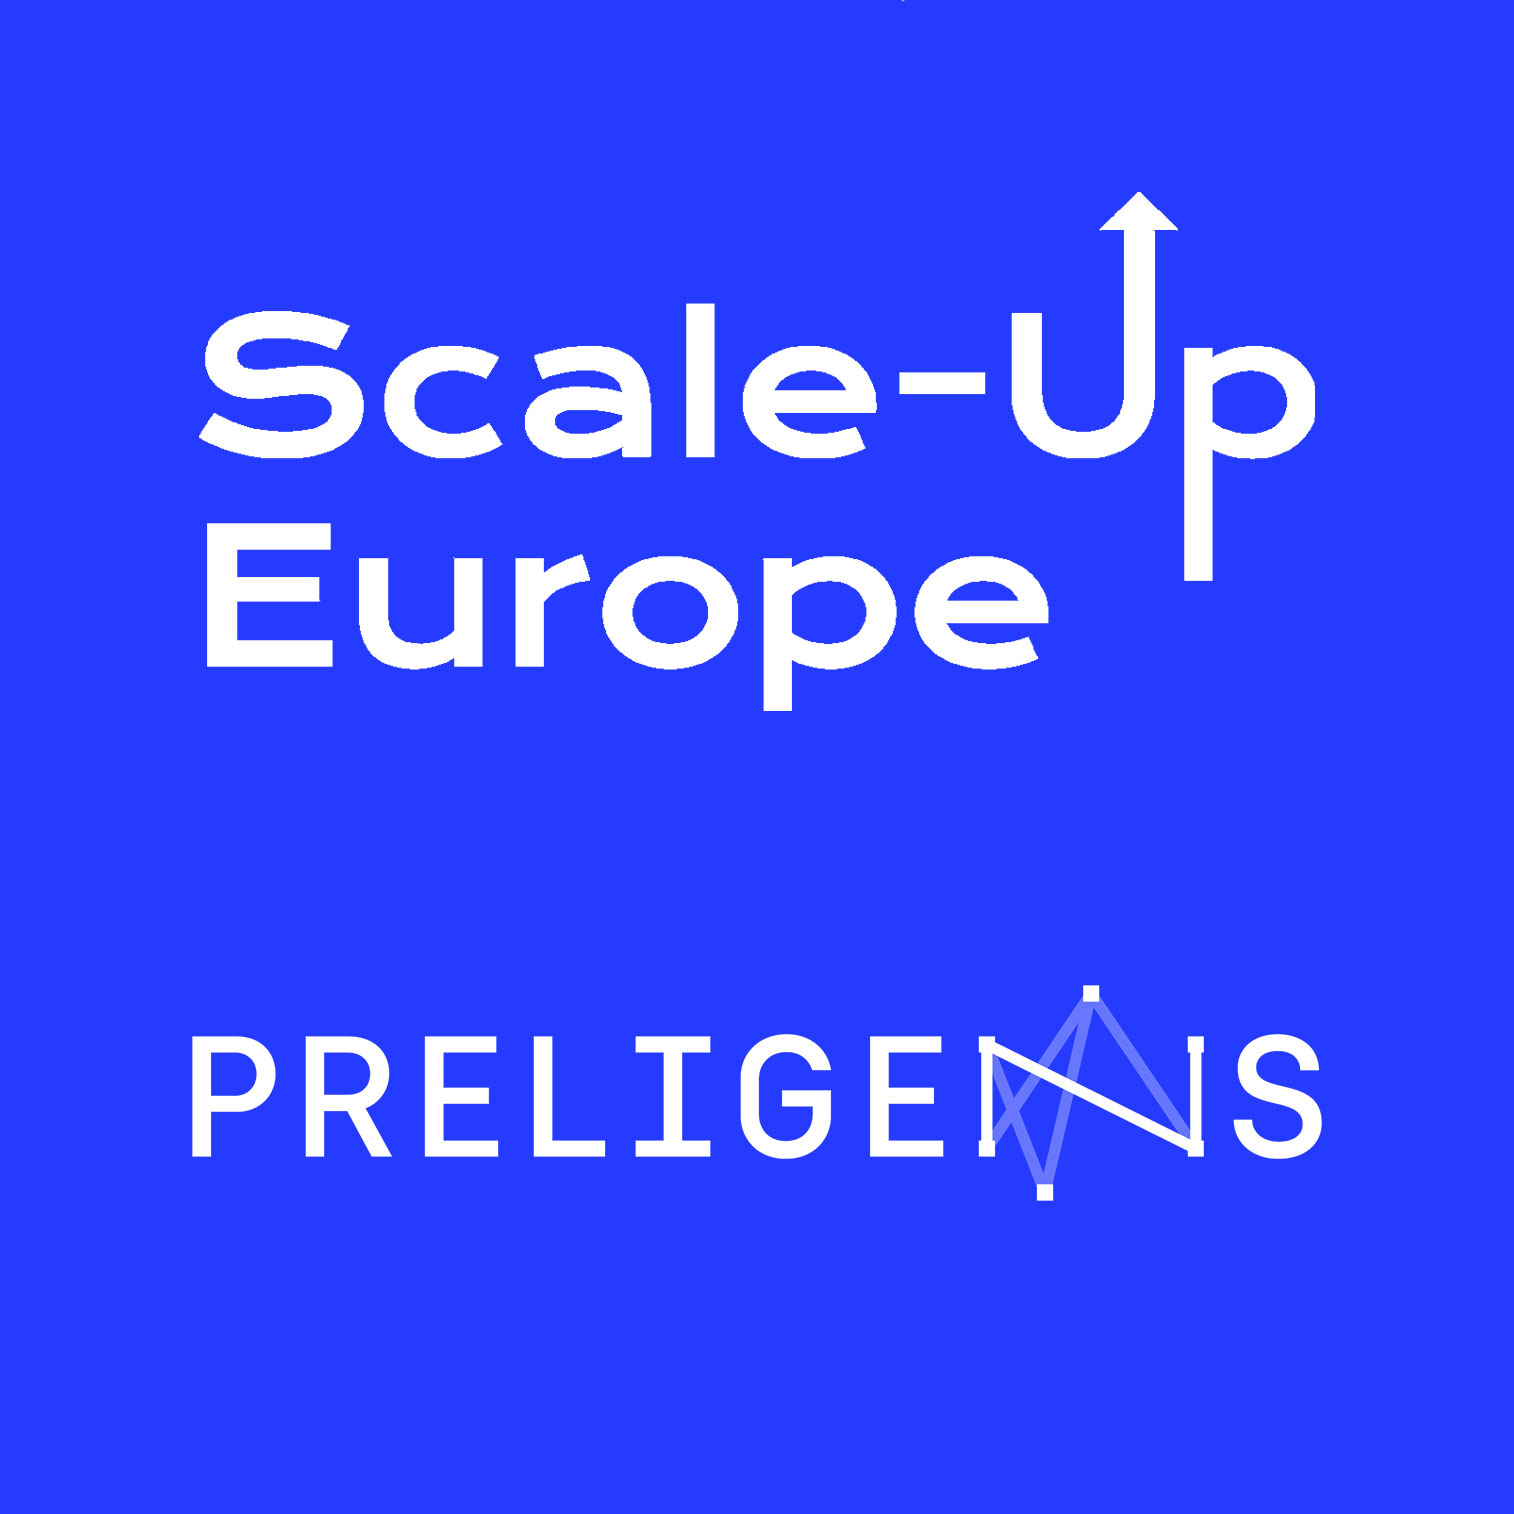 Preligens a founding member of the Scale-Up Europe Initiative